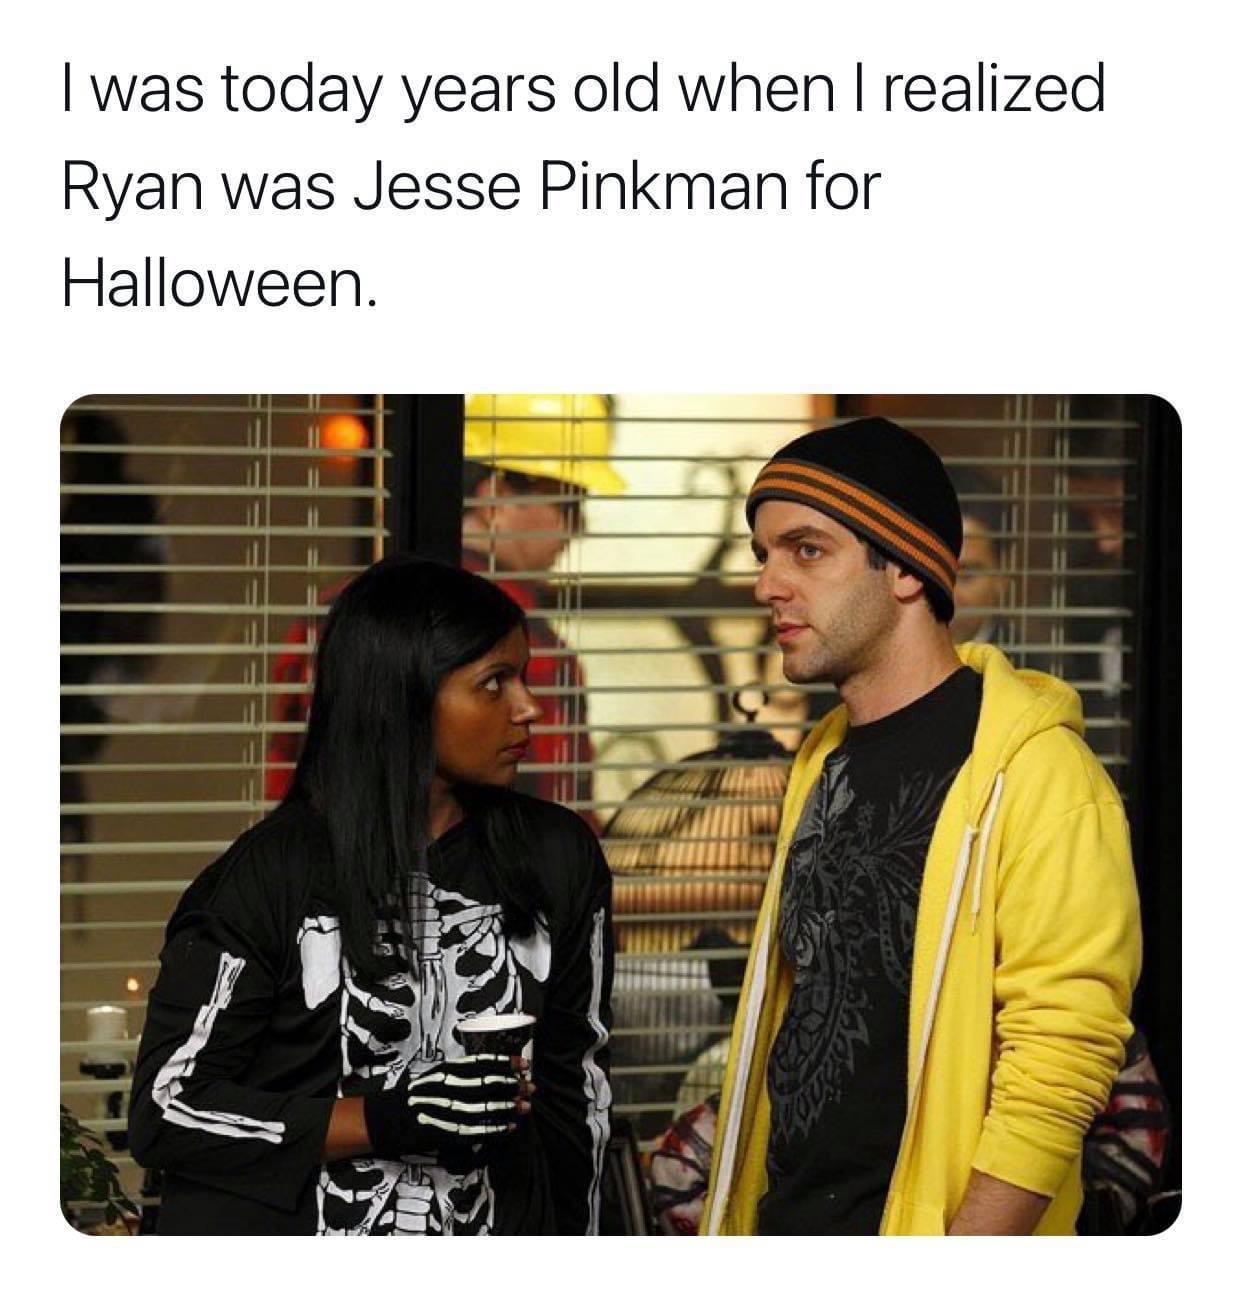 The Office memes - office halloween costumes - I was today years old when I realized Ryan was Jesse Pinkman for Halloween.